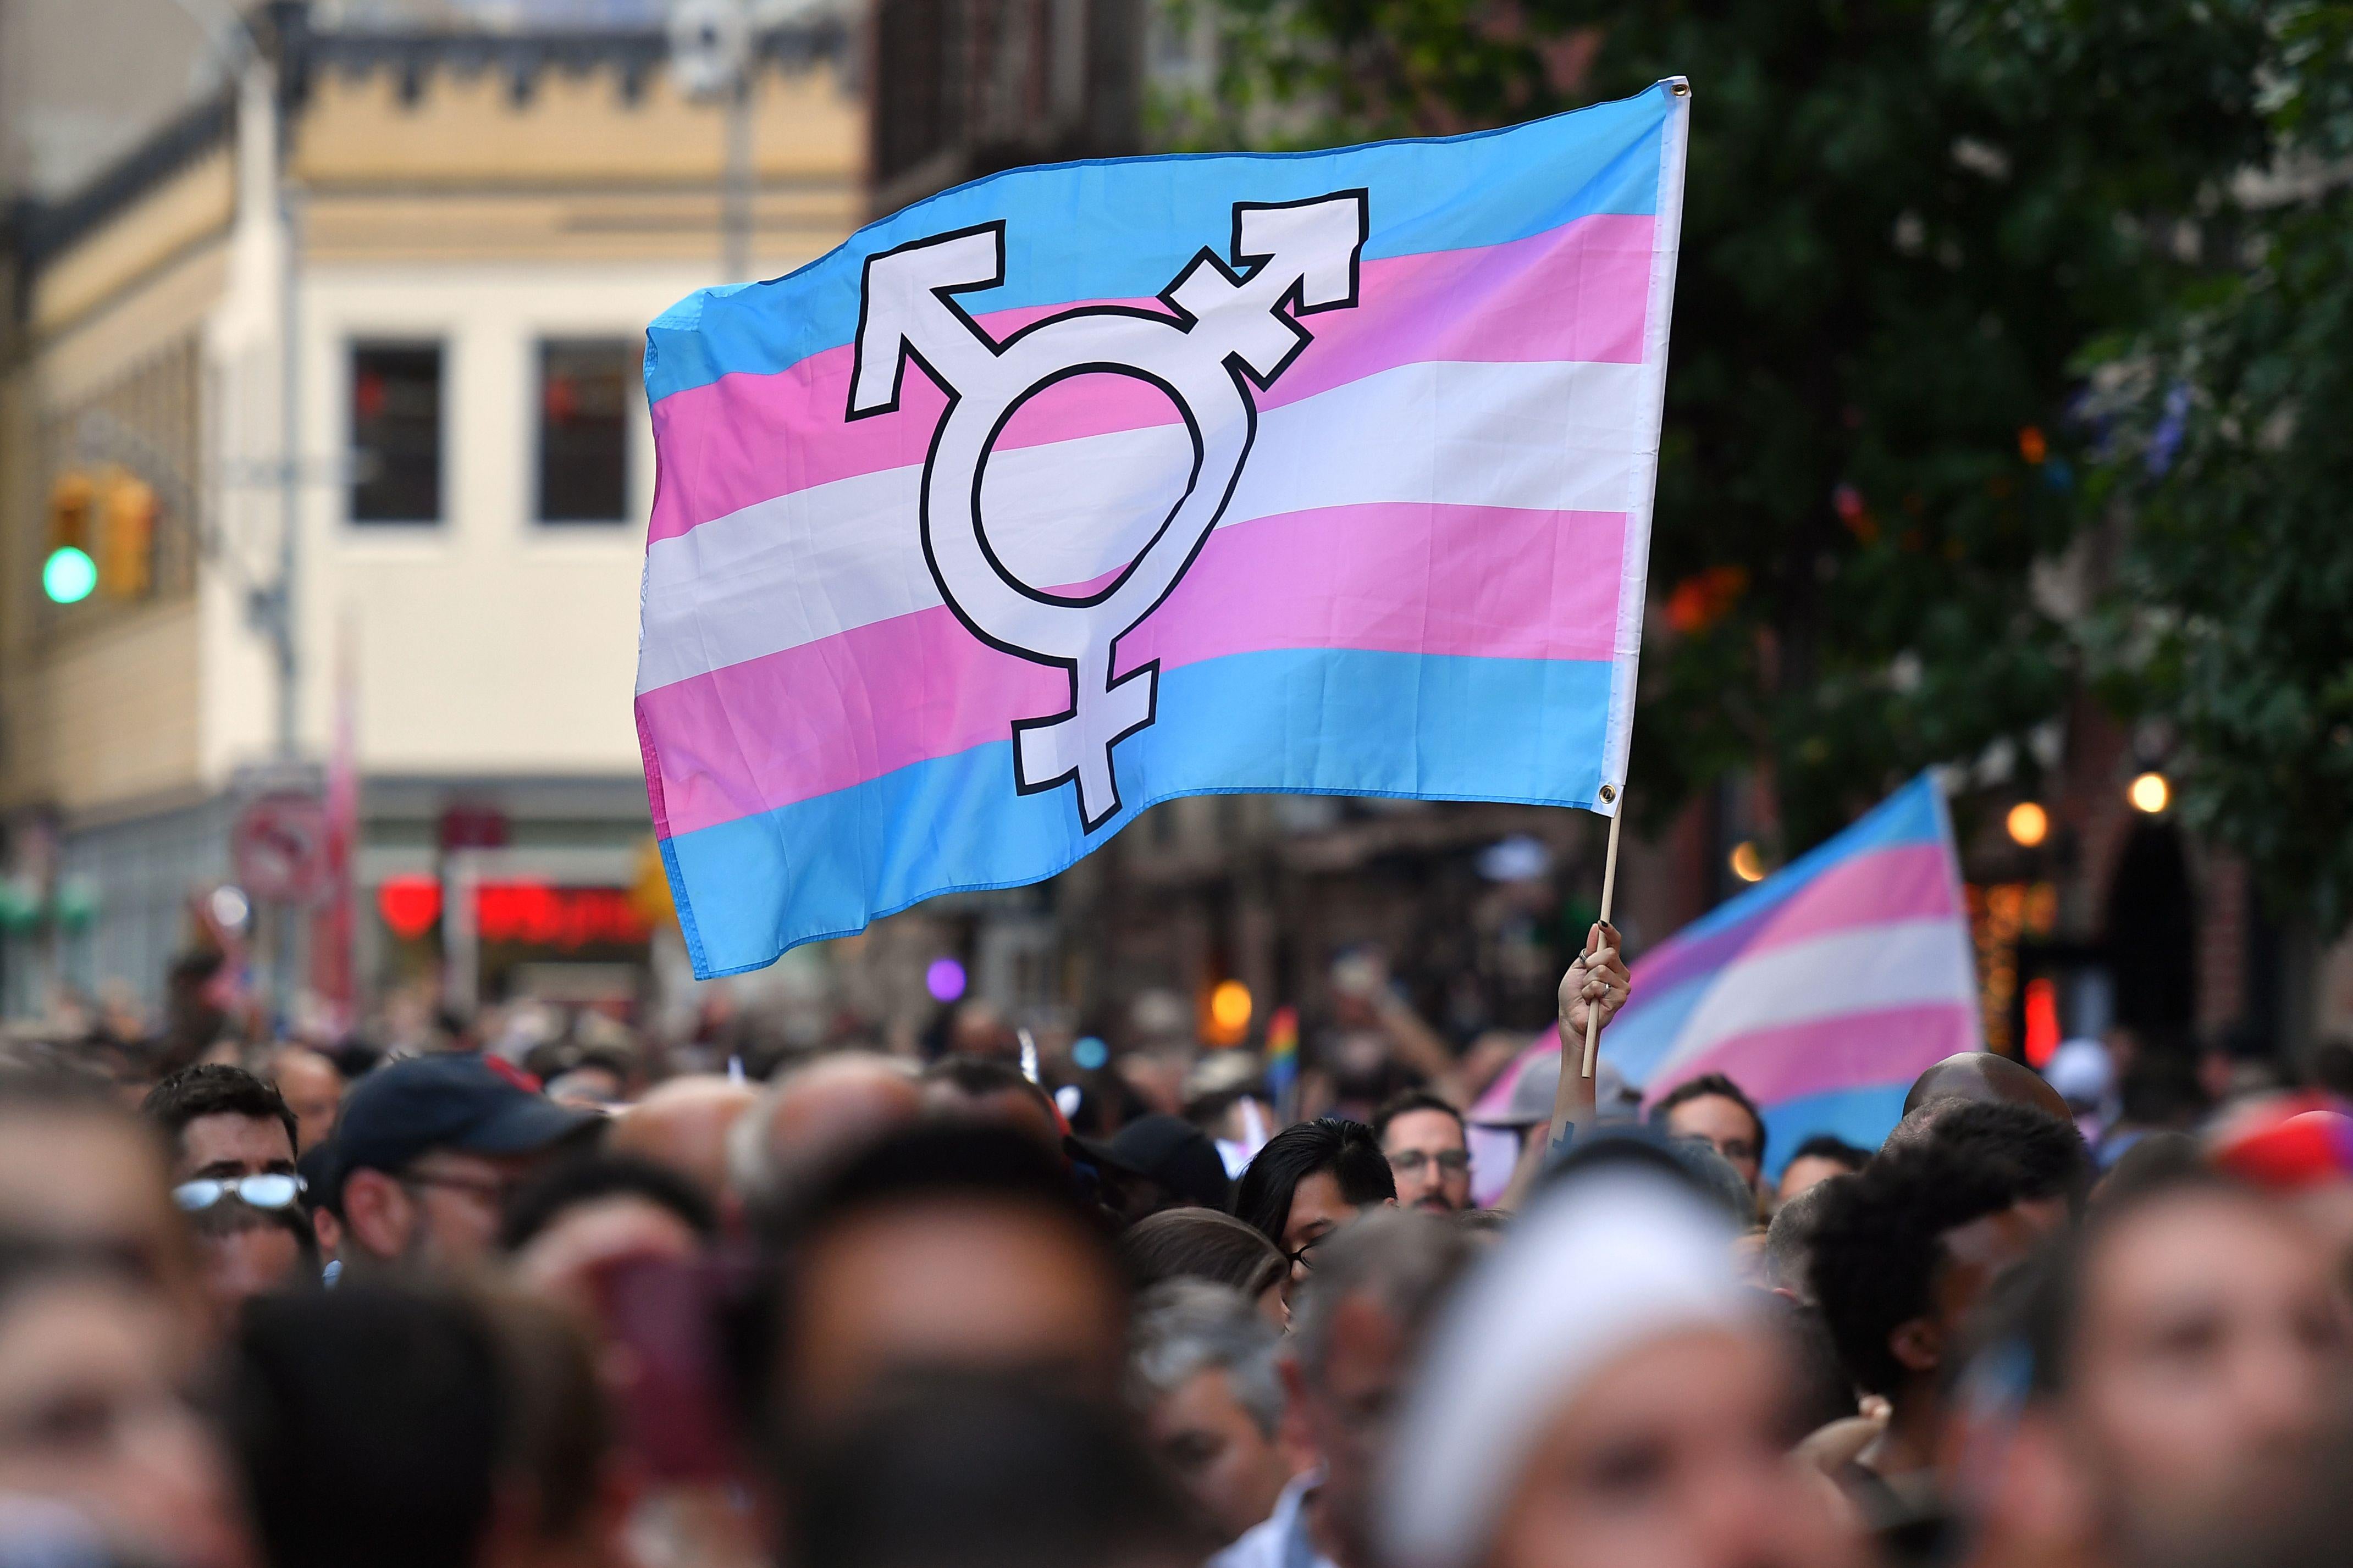 A person holds up a transgender pride flag in the middle of a crowd.